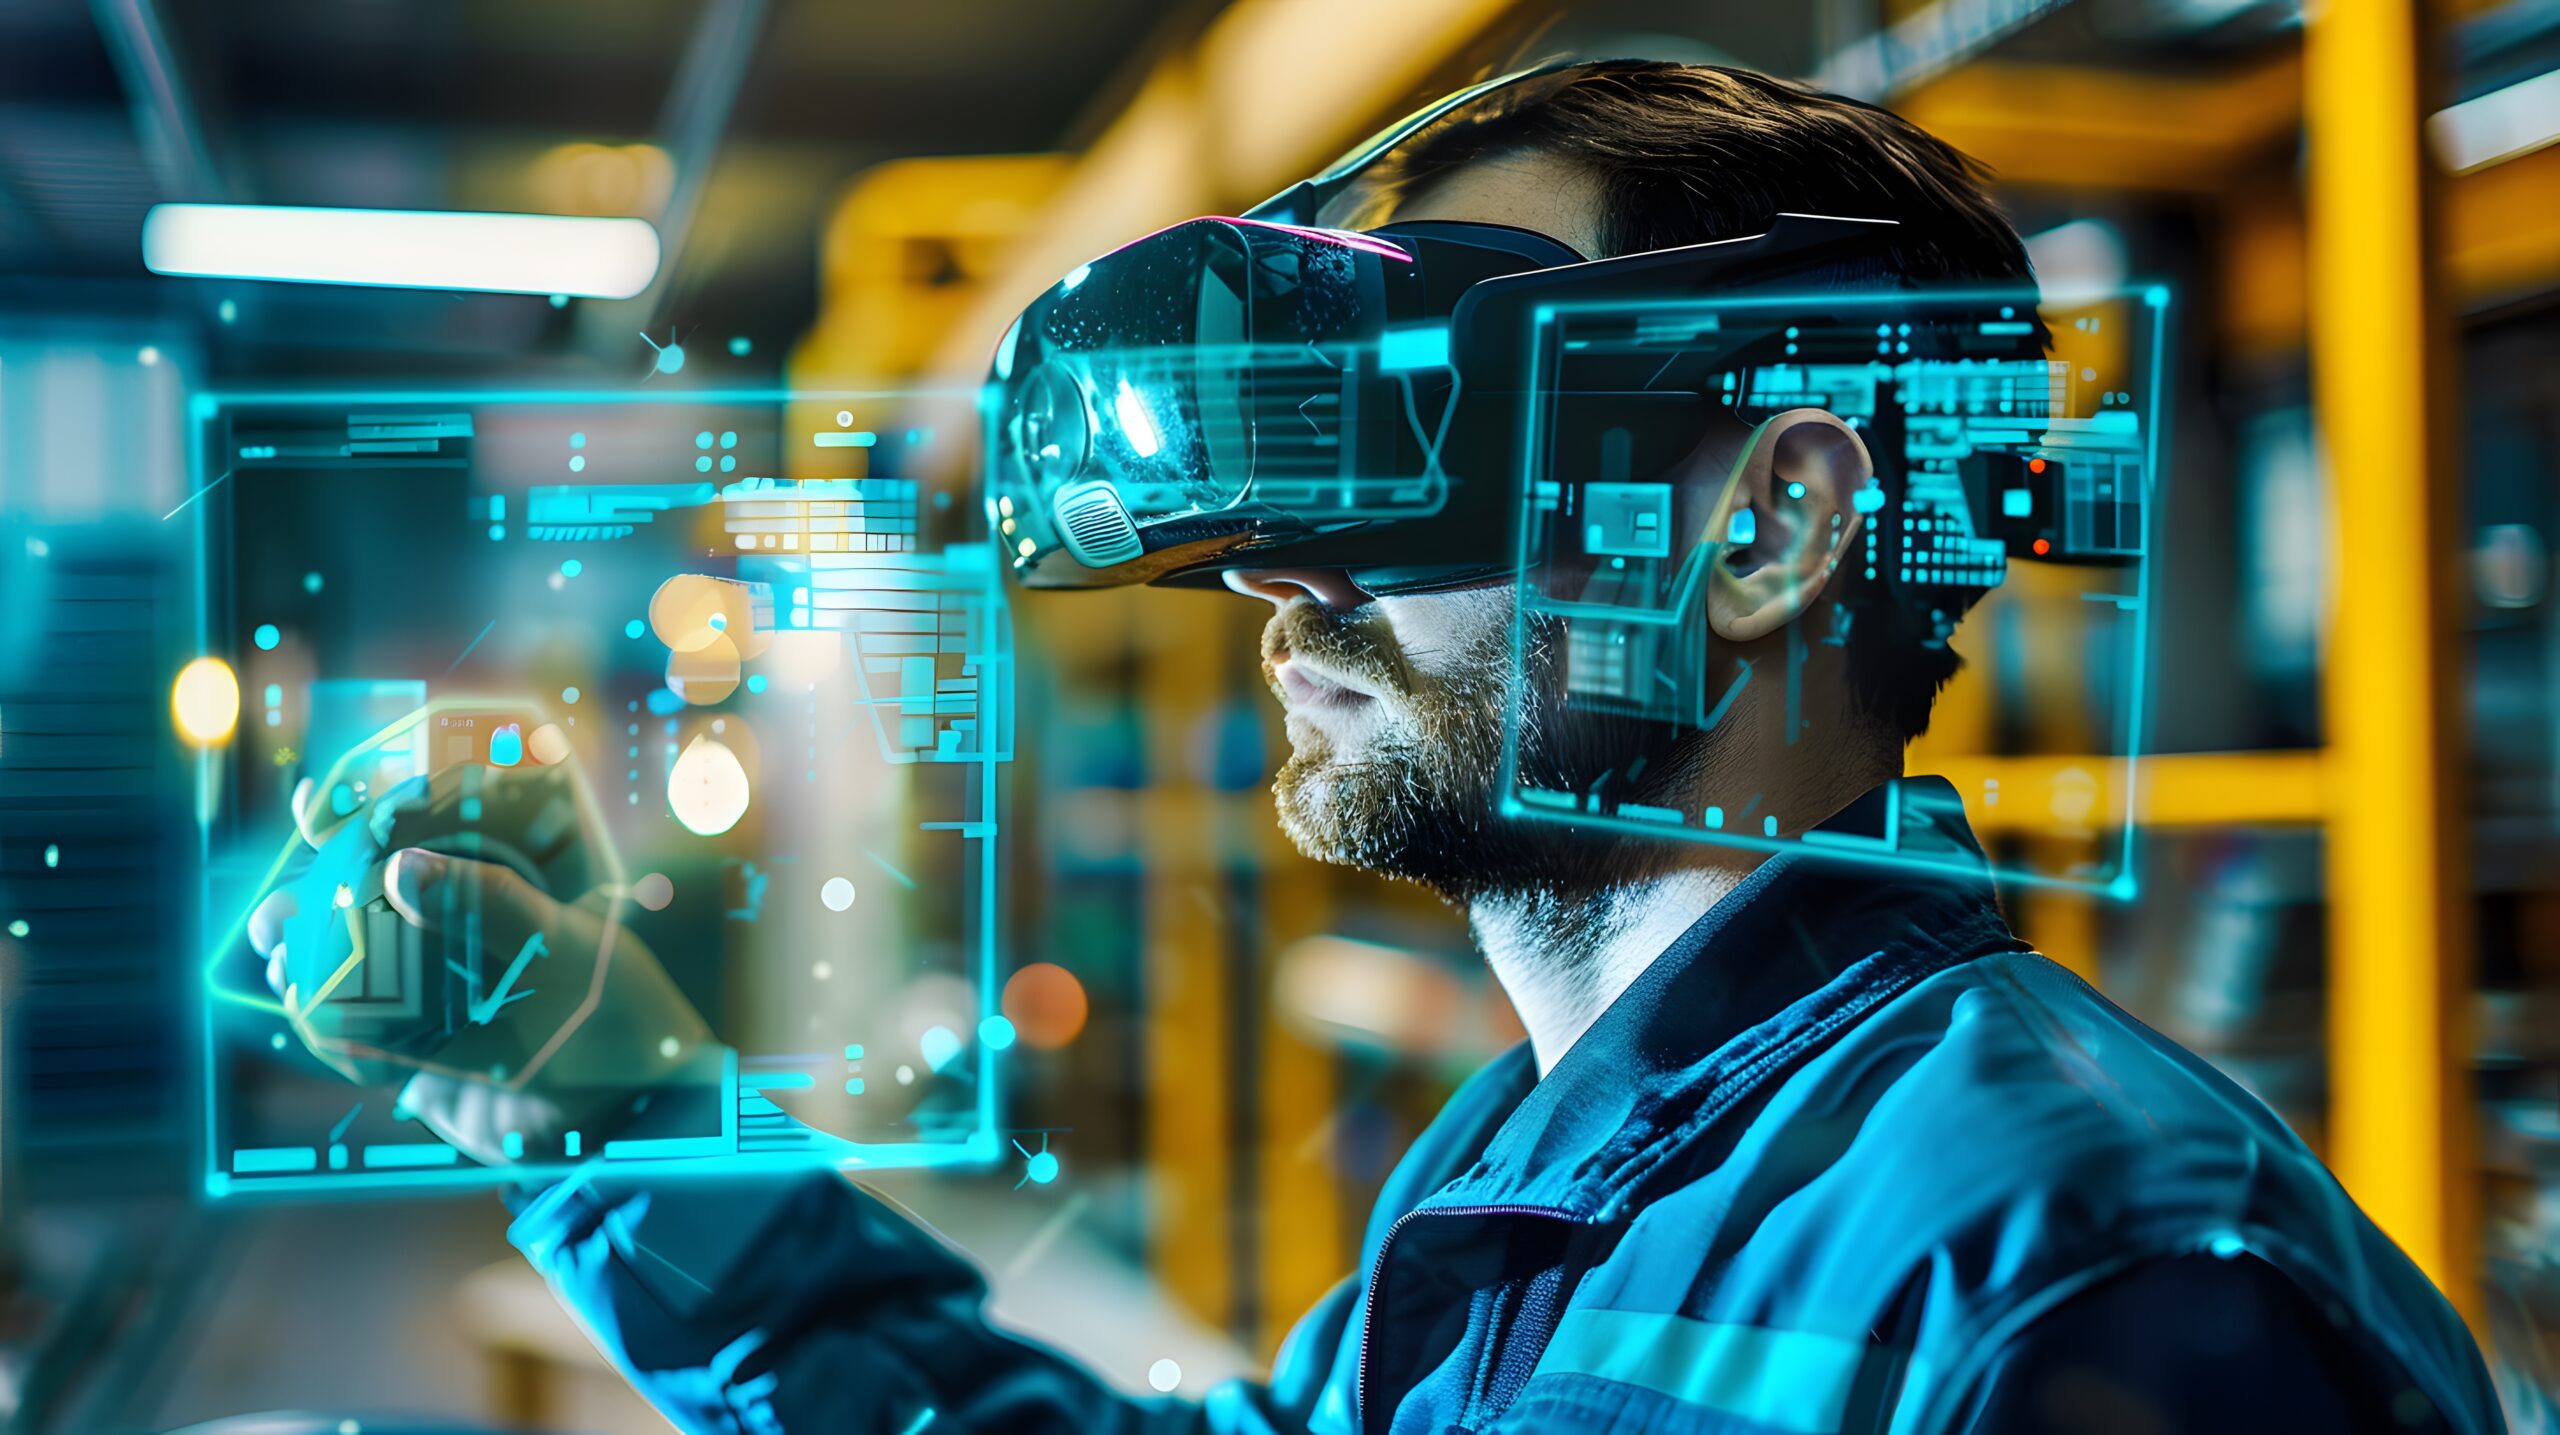 Training for tomorrow: Mastering manufacturing skills with immersive technology 